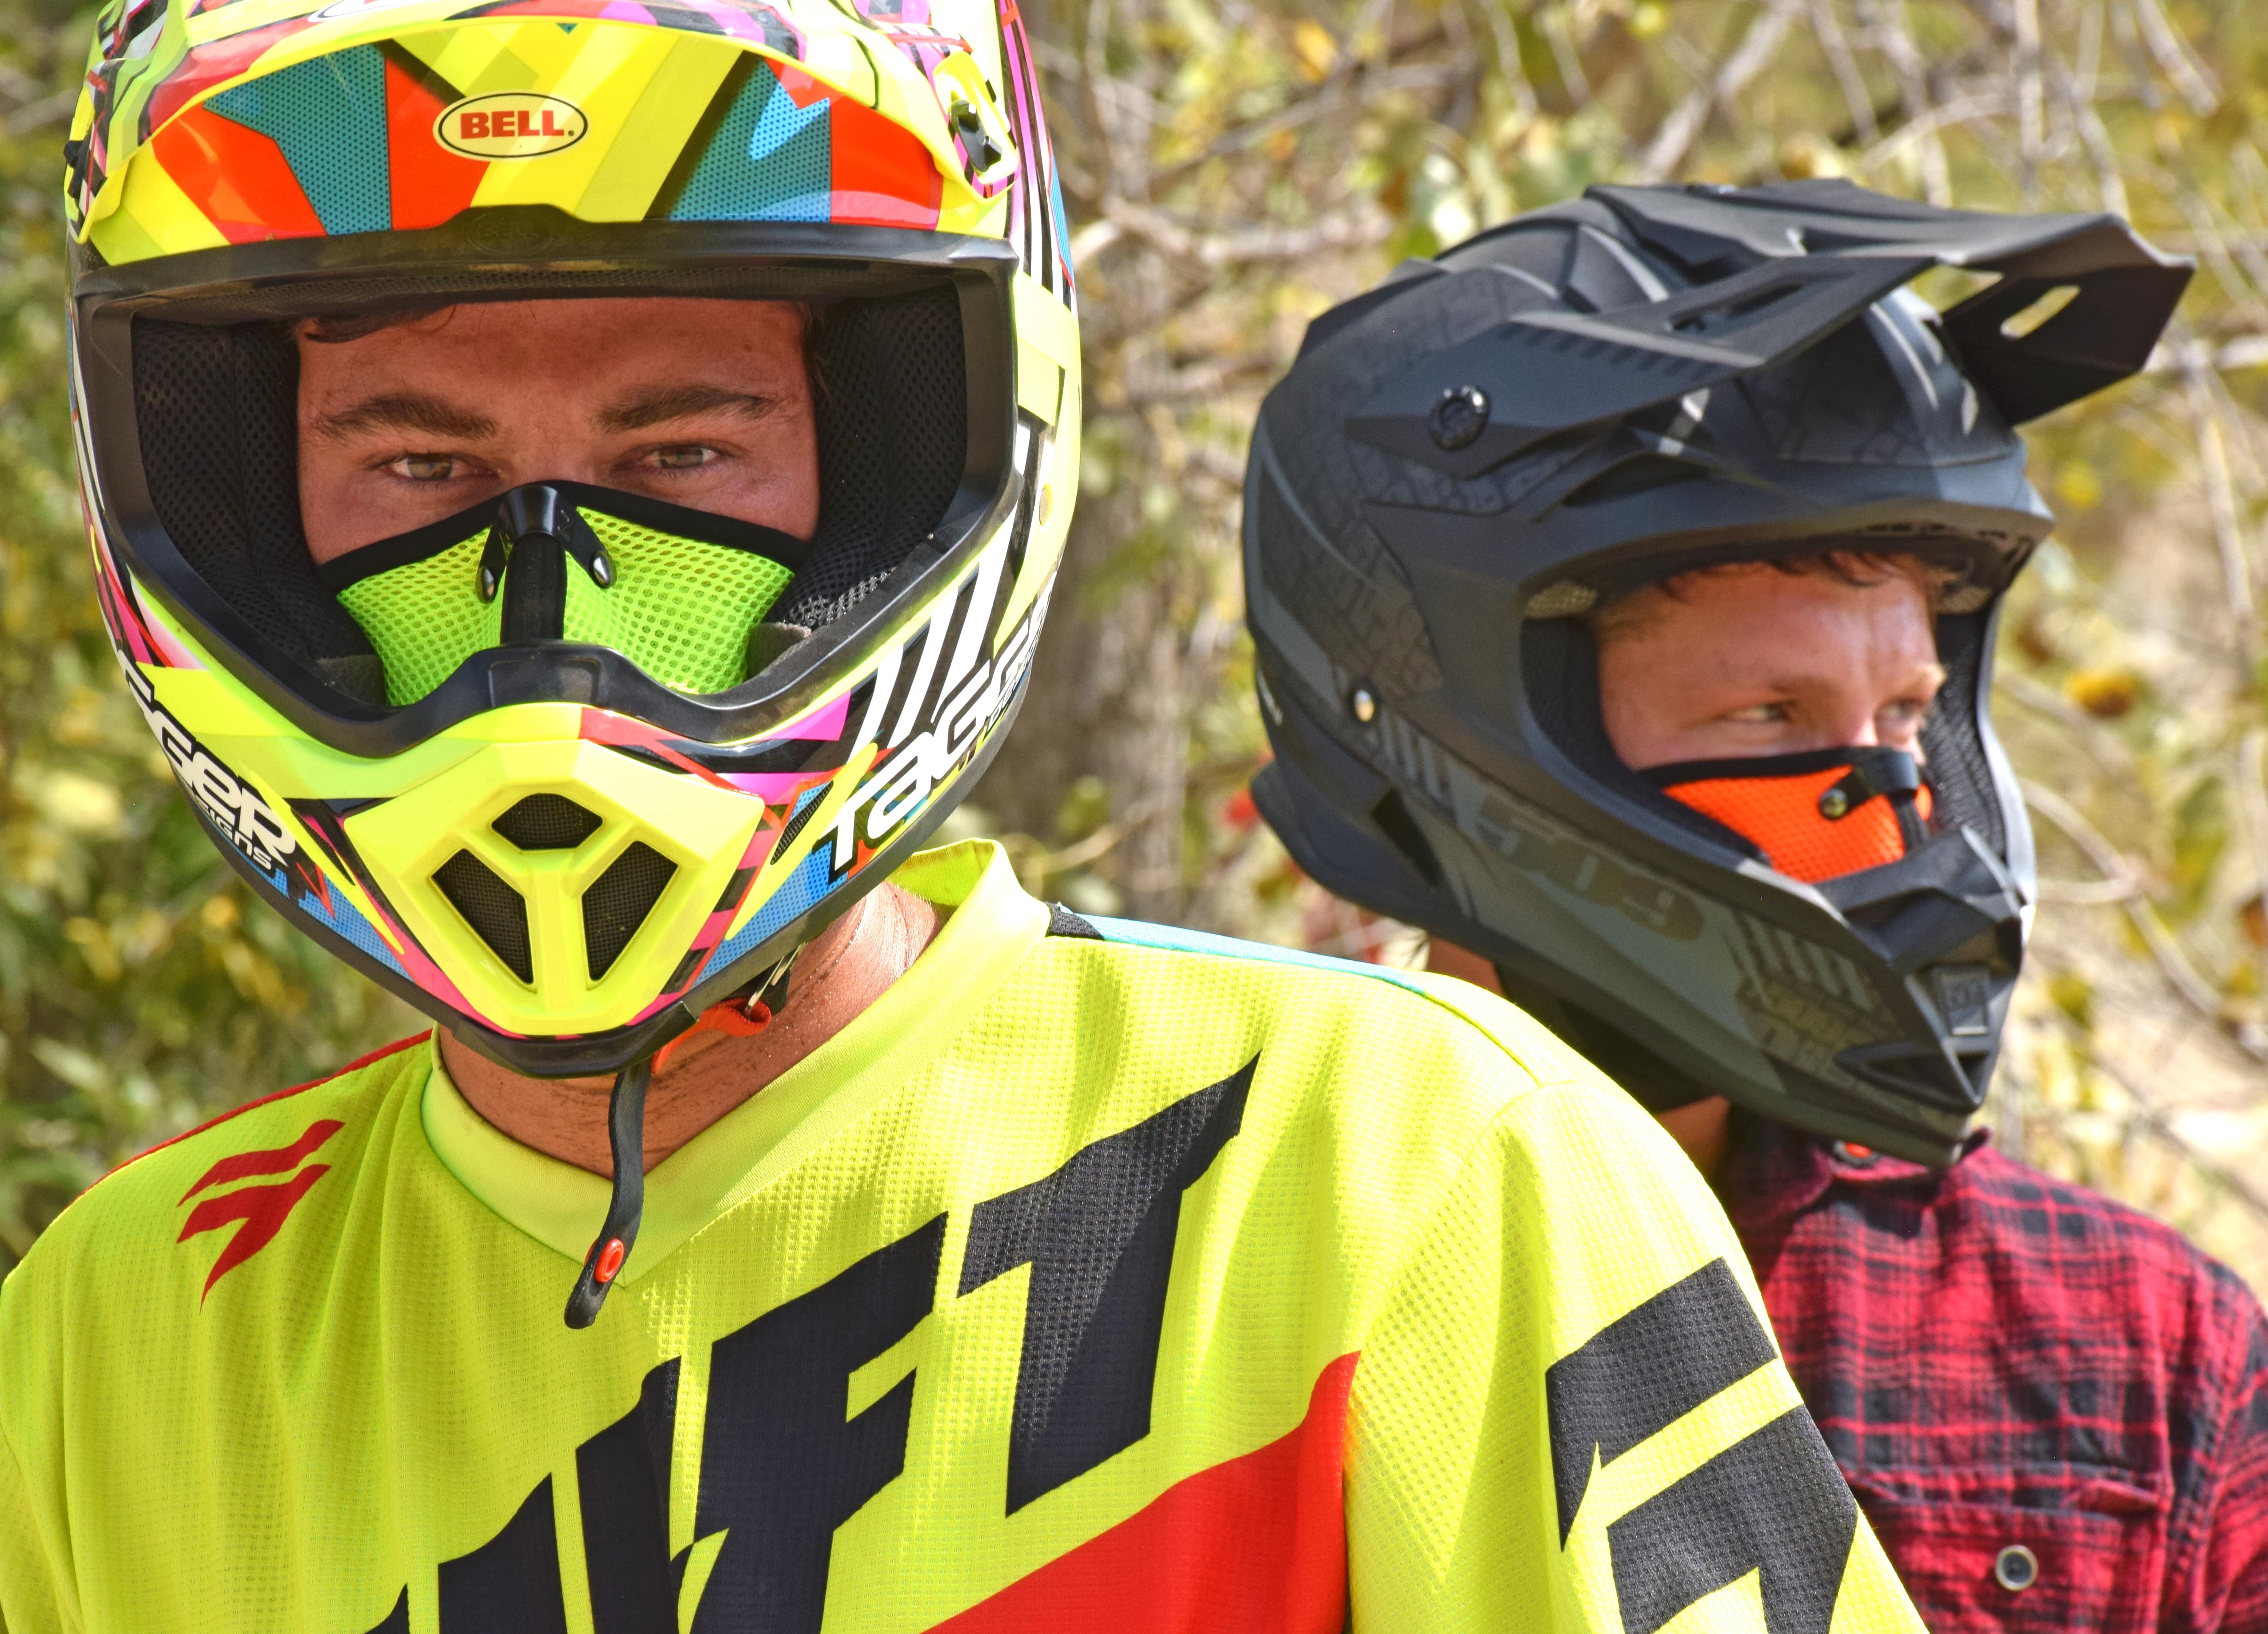 Two men wearing RZ Masks while preparing to go dirt biking while wearing helmets and rz masks to protect from dust